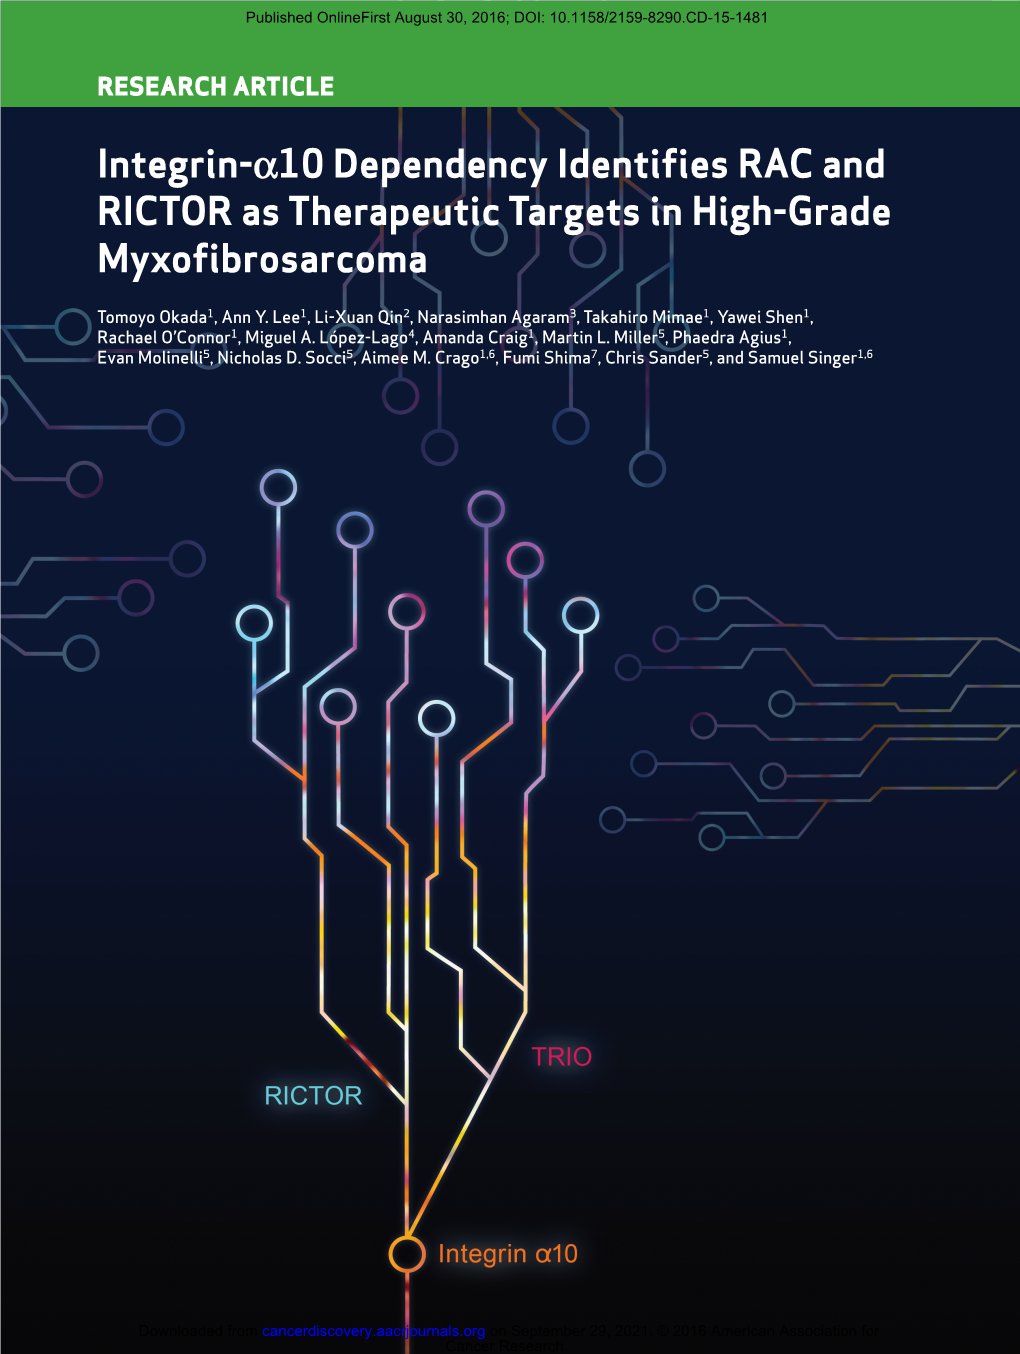 Integrin-Α10 Dependency Identifies RAC and RICTOR As Therapeutic Targets in High-Grade Myxofibrosarcoma